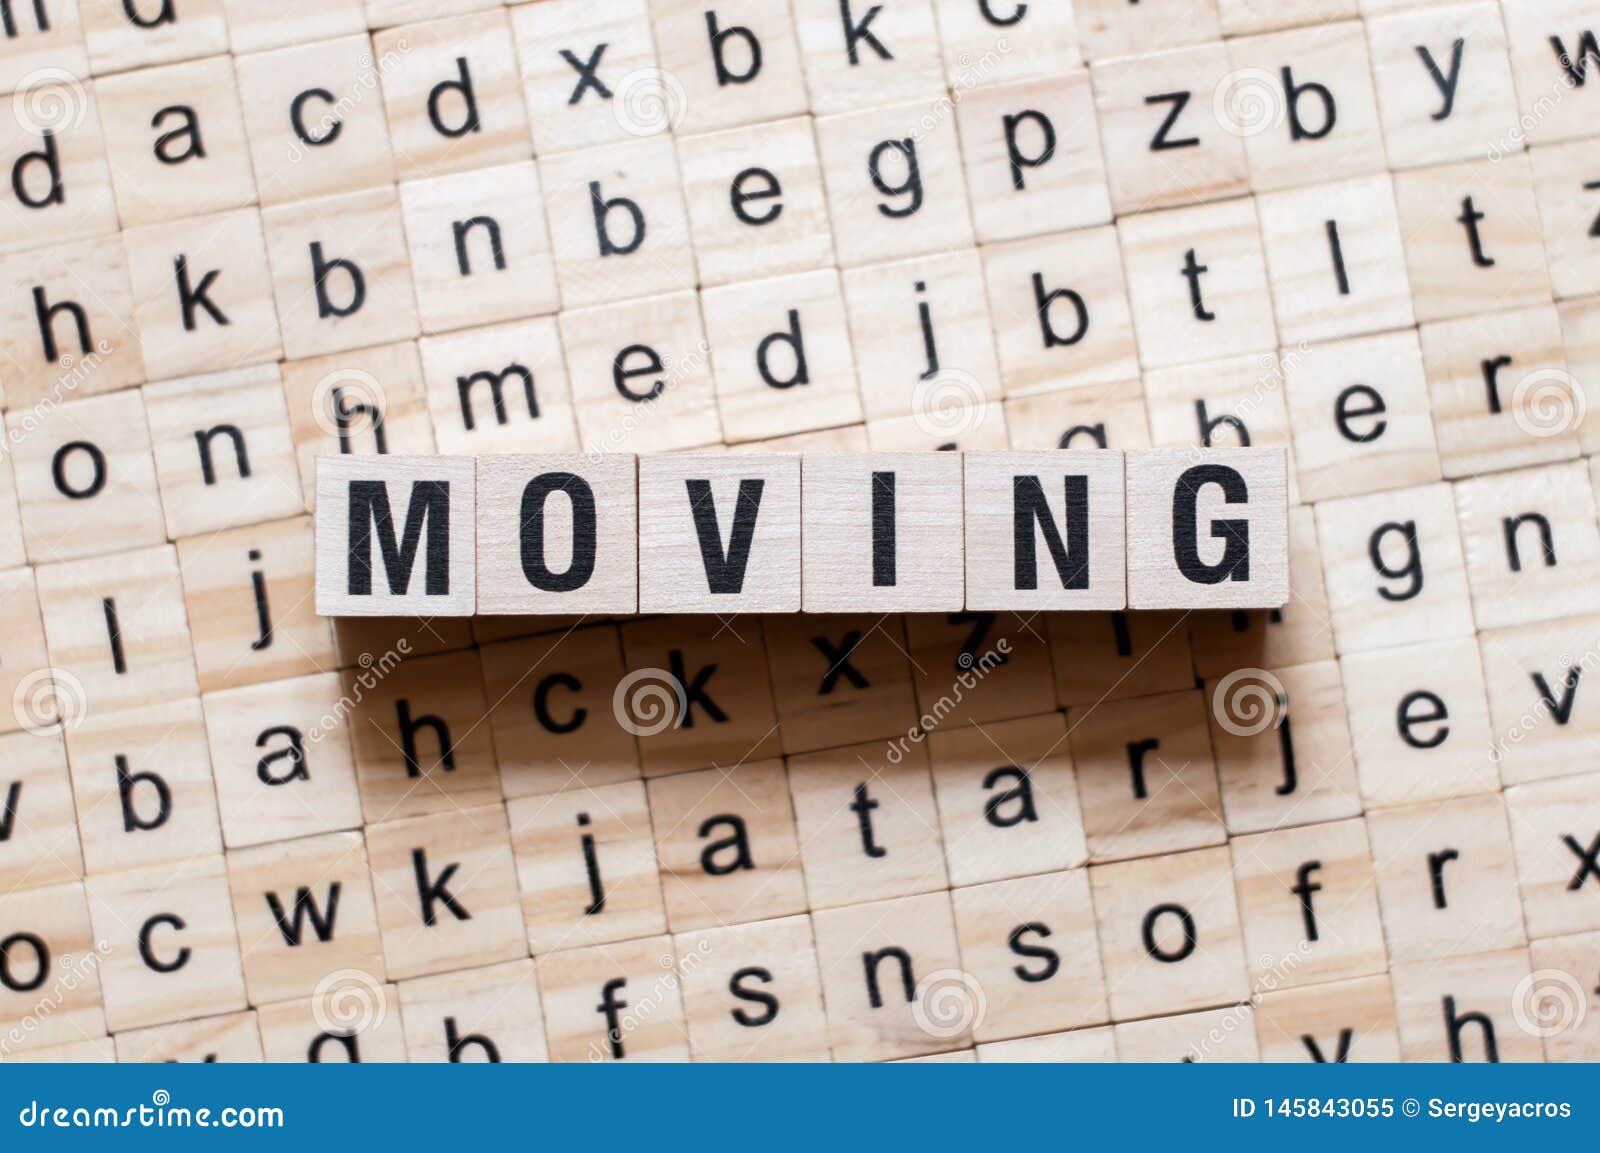 another word for moving on in presentation